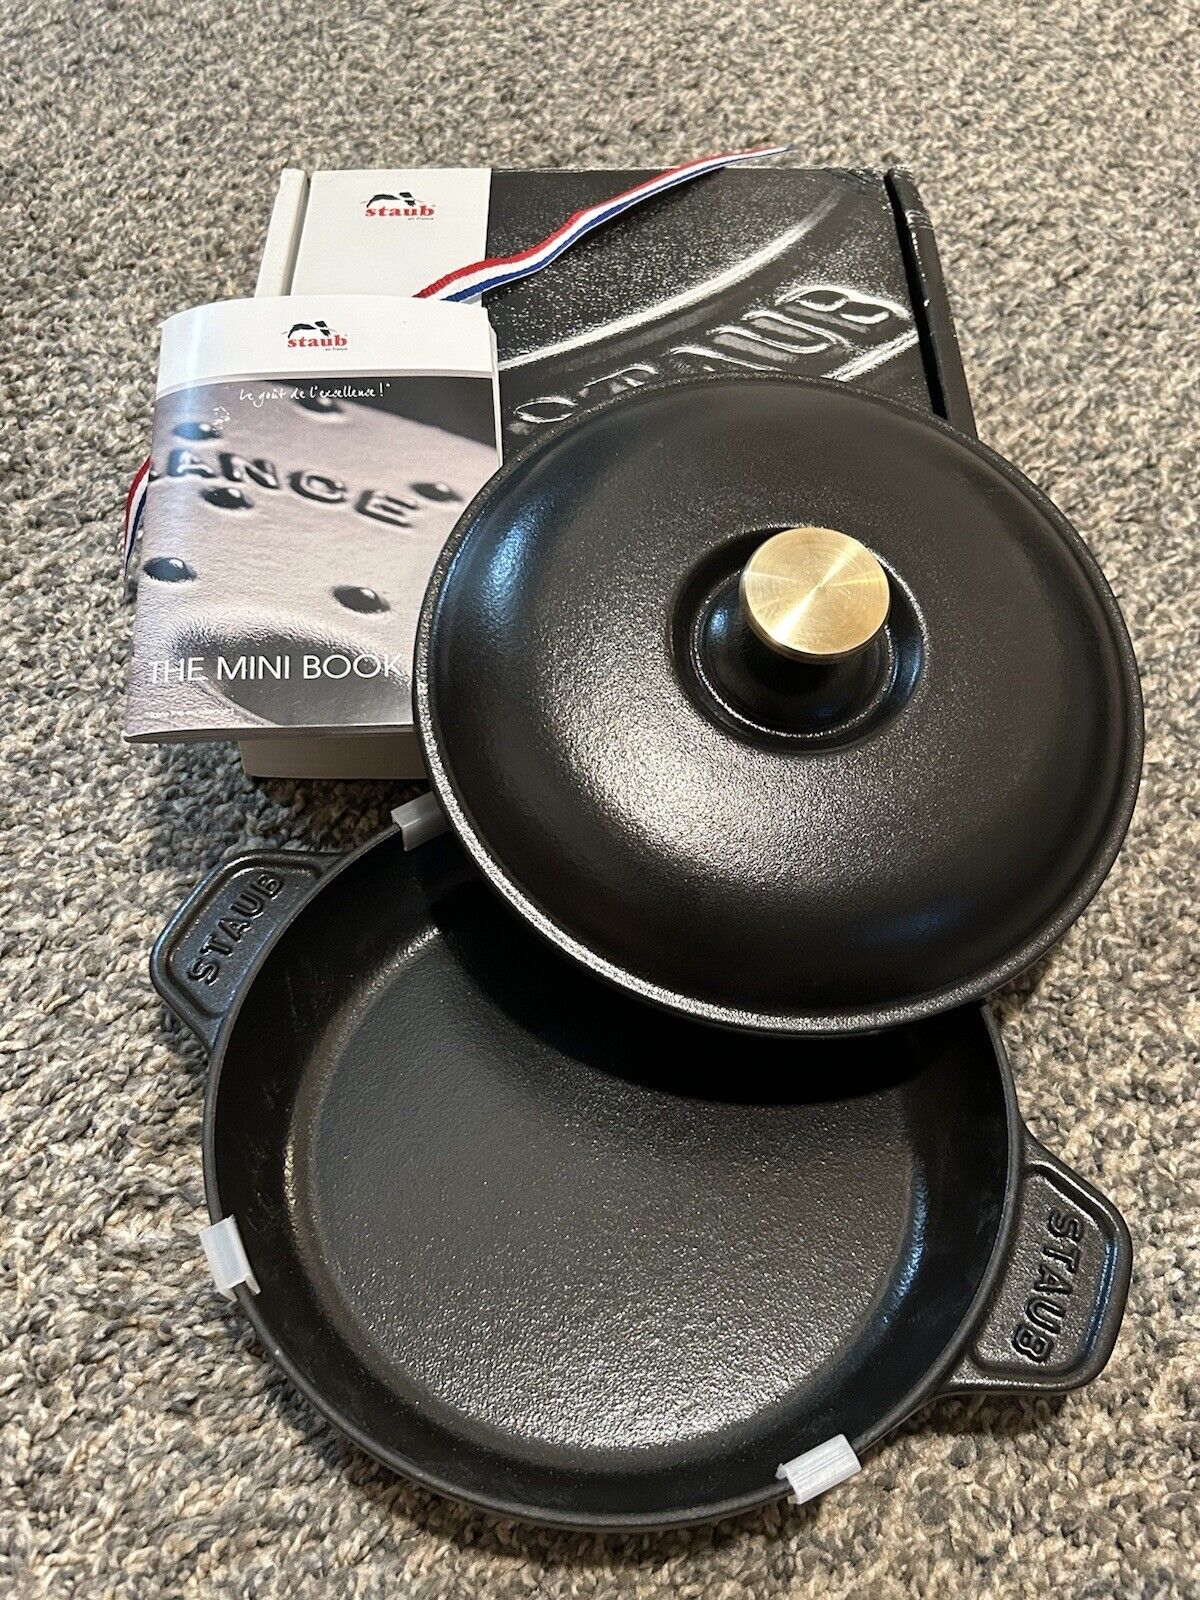 Staub Enamelled Round Hot Plate .75 qt Cast Iron Black Pan With Lid Brand New